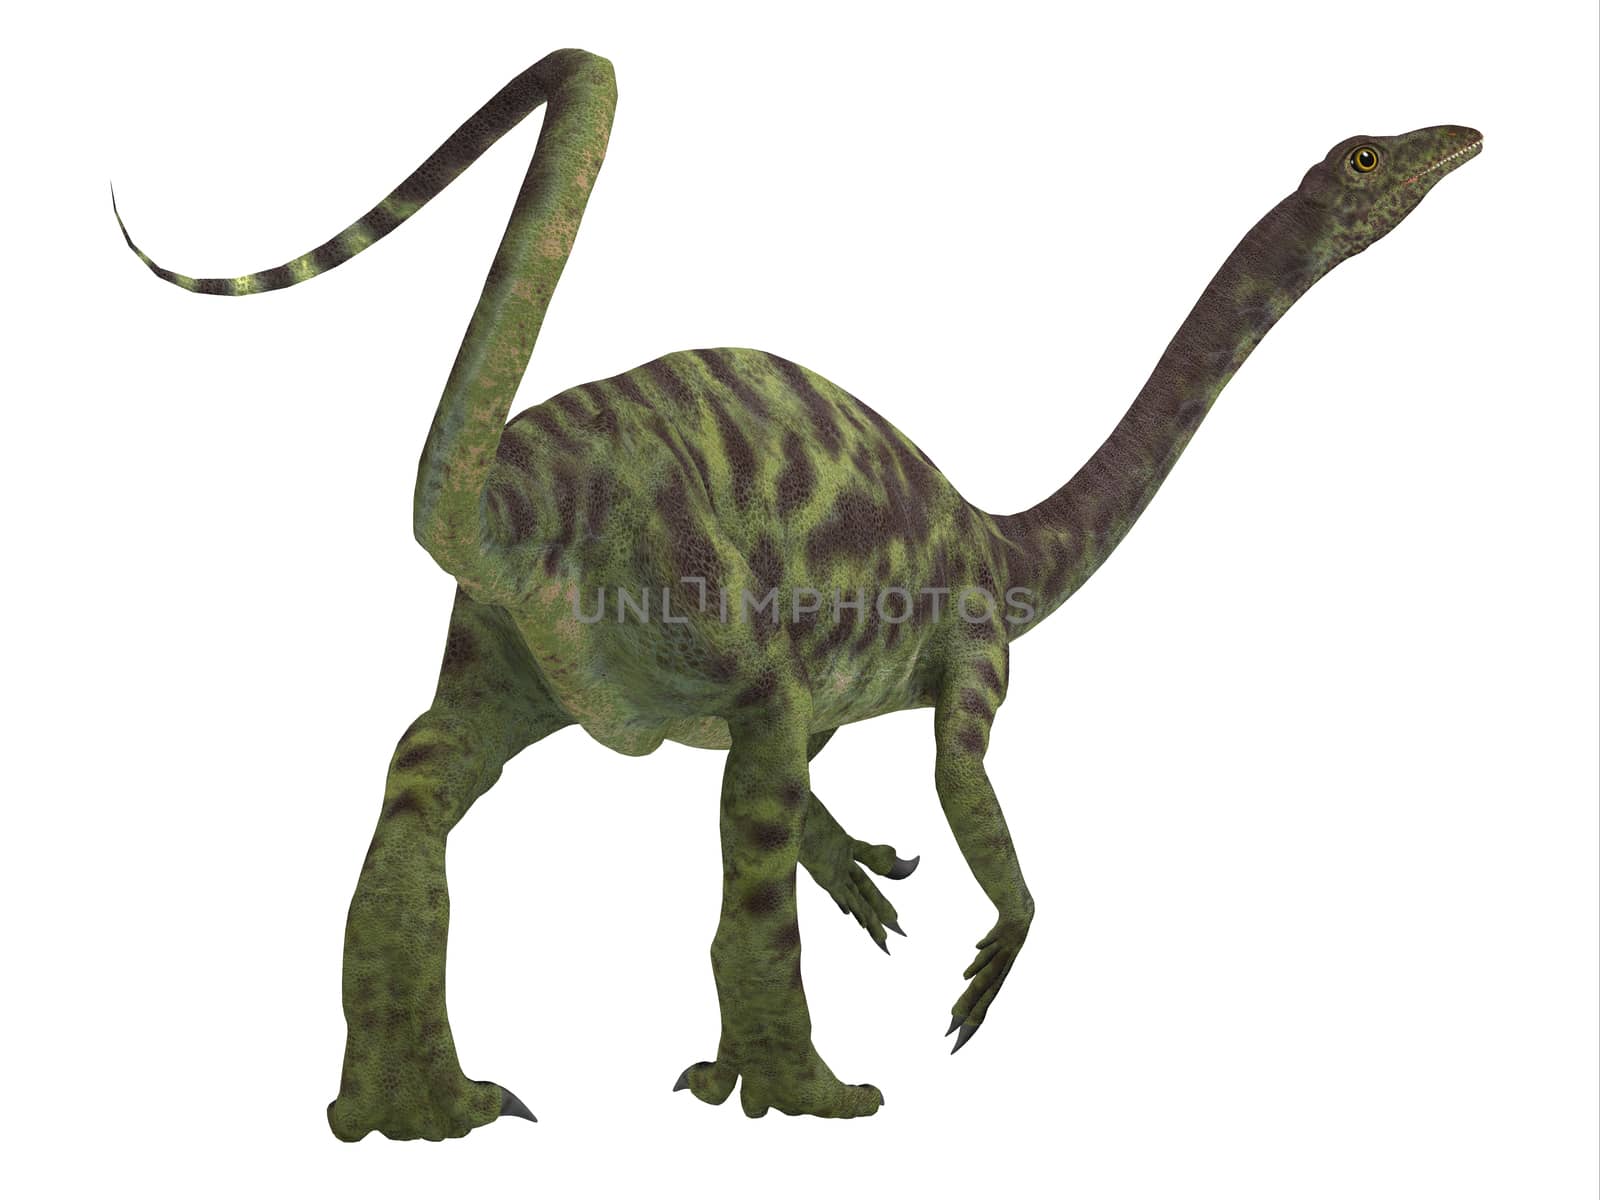 Anchisaurus was a omnivorous prosauropod dinosaur that lived in the Jurassic Periods of North America, Europe and Africa.